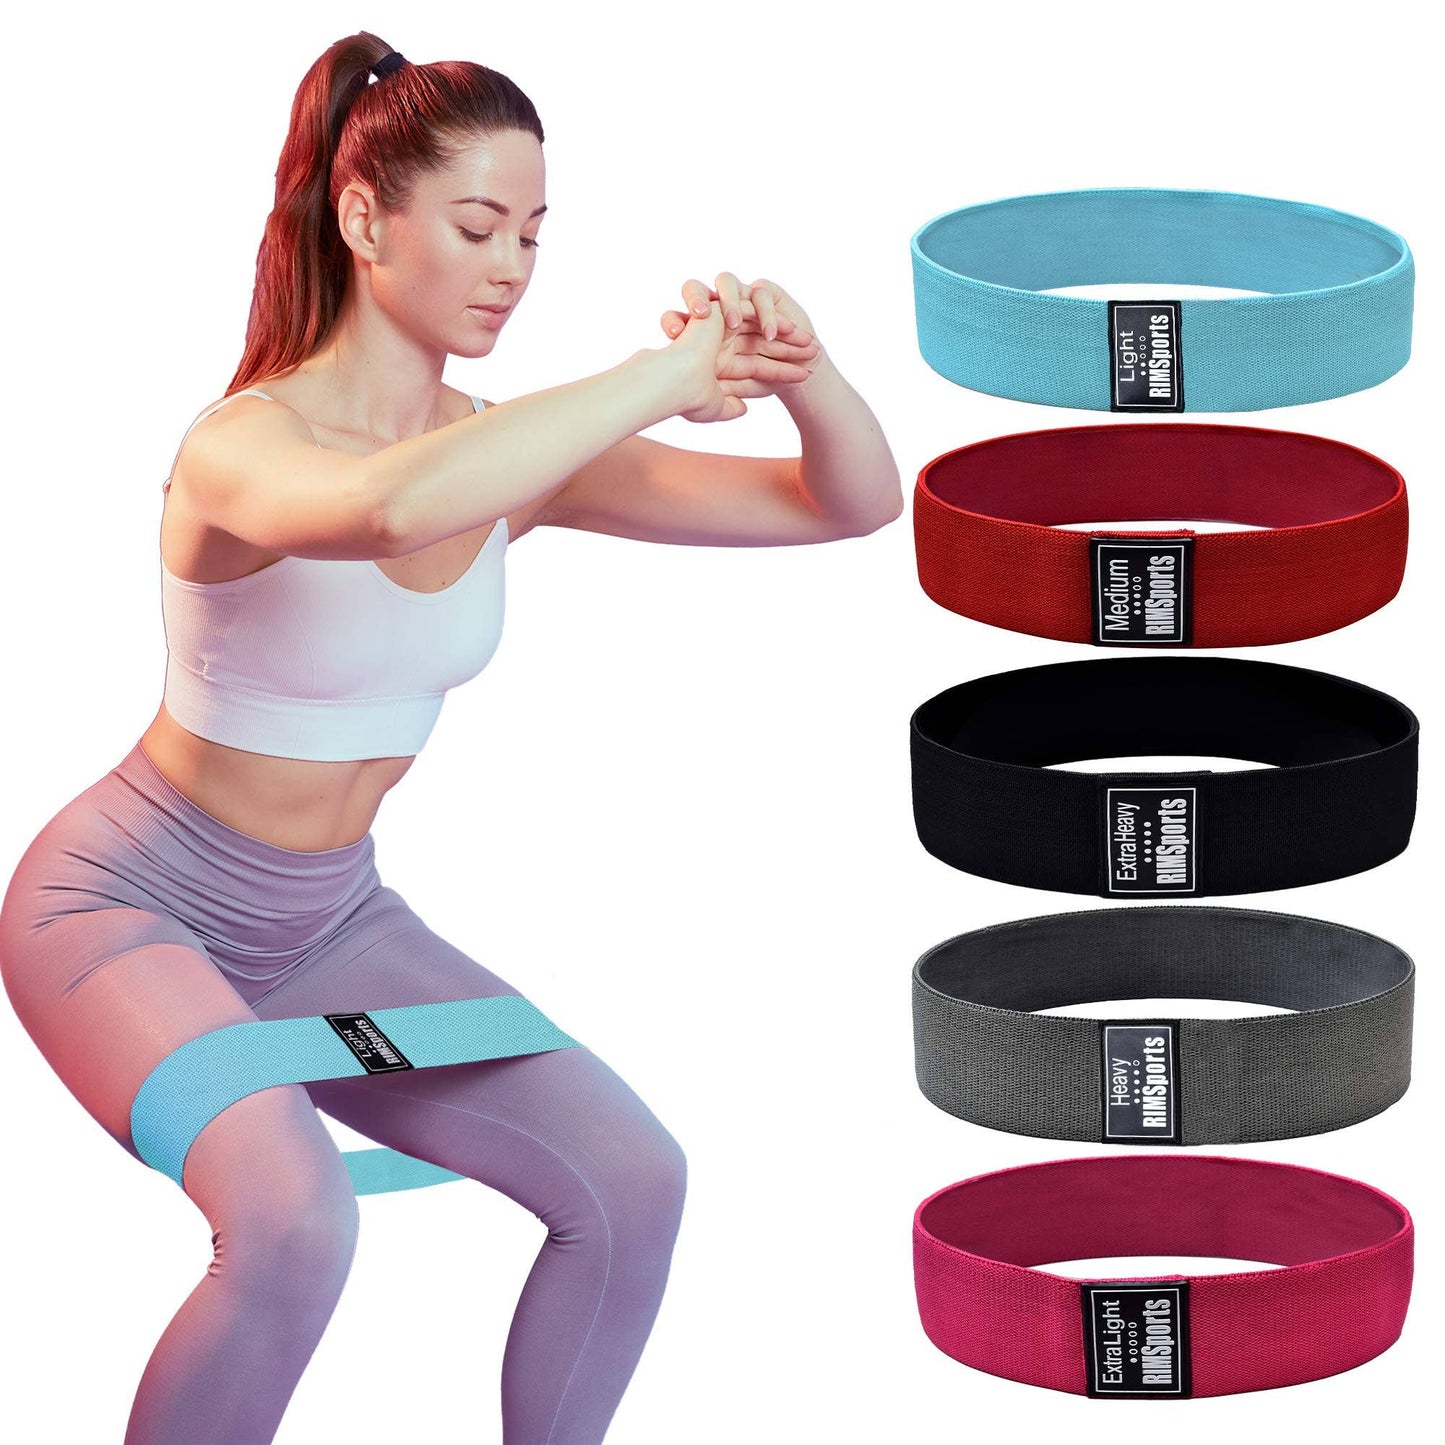 Booty Bands for Legs and Butt (Set of 5)